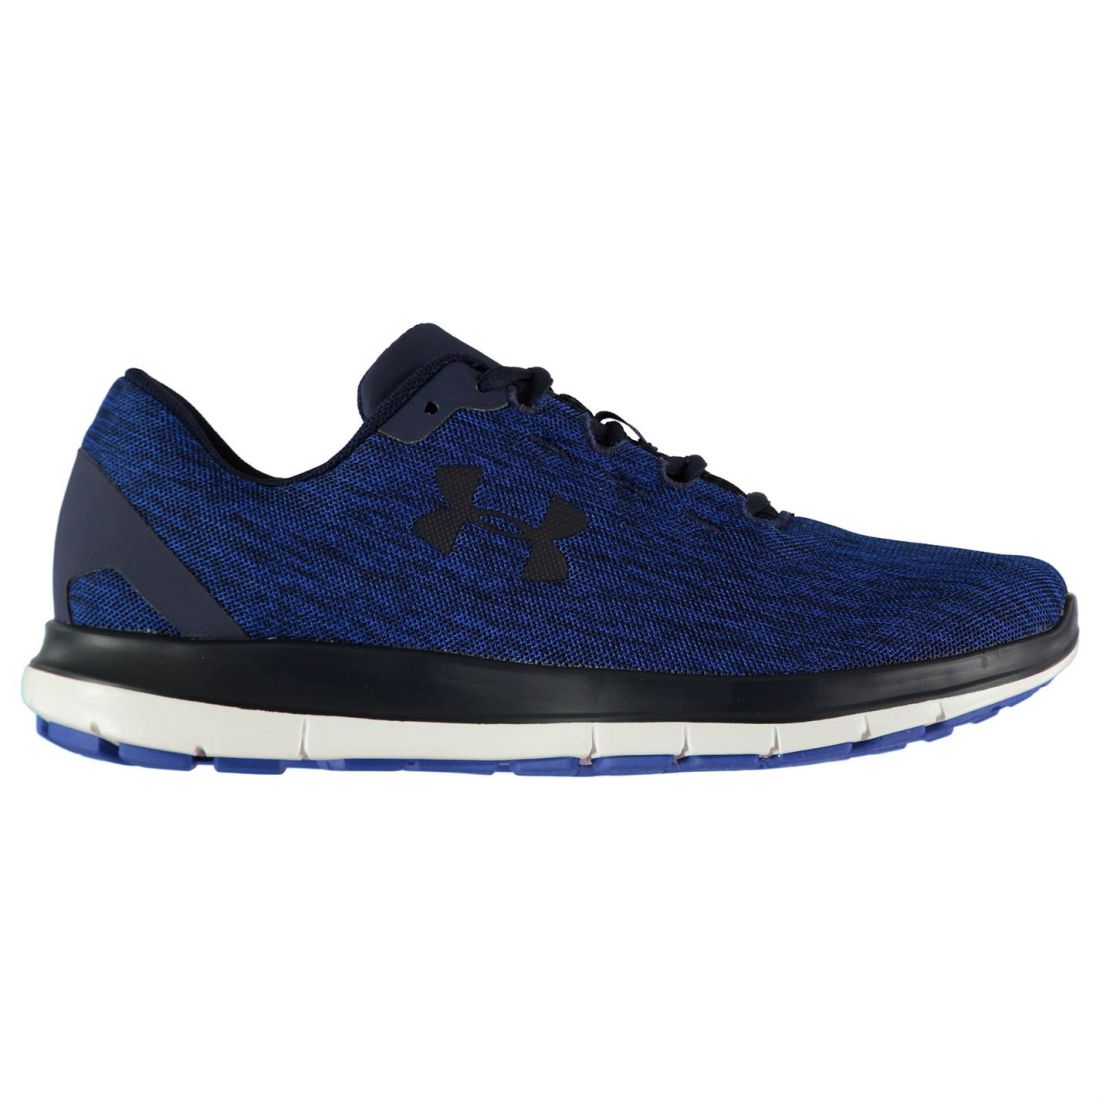 Under Armour Mens Remix Trainers Sports Running Shoes Lace Up ...